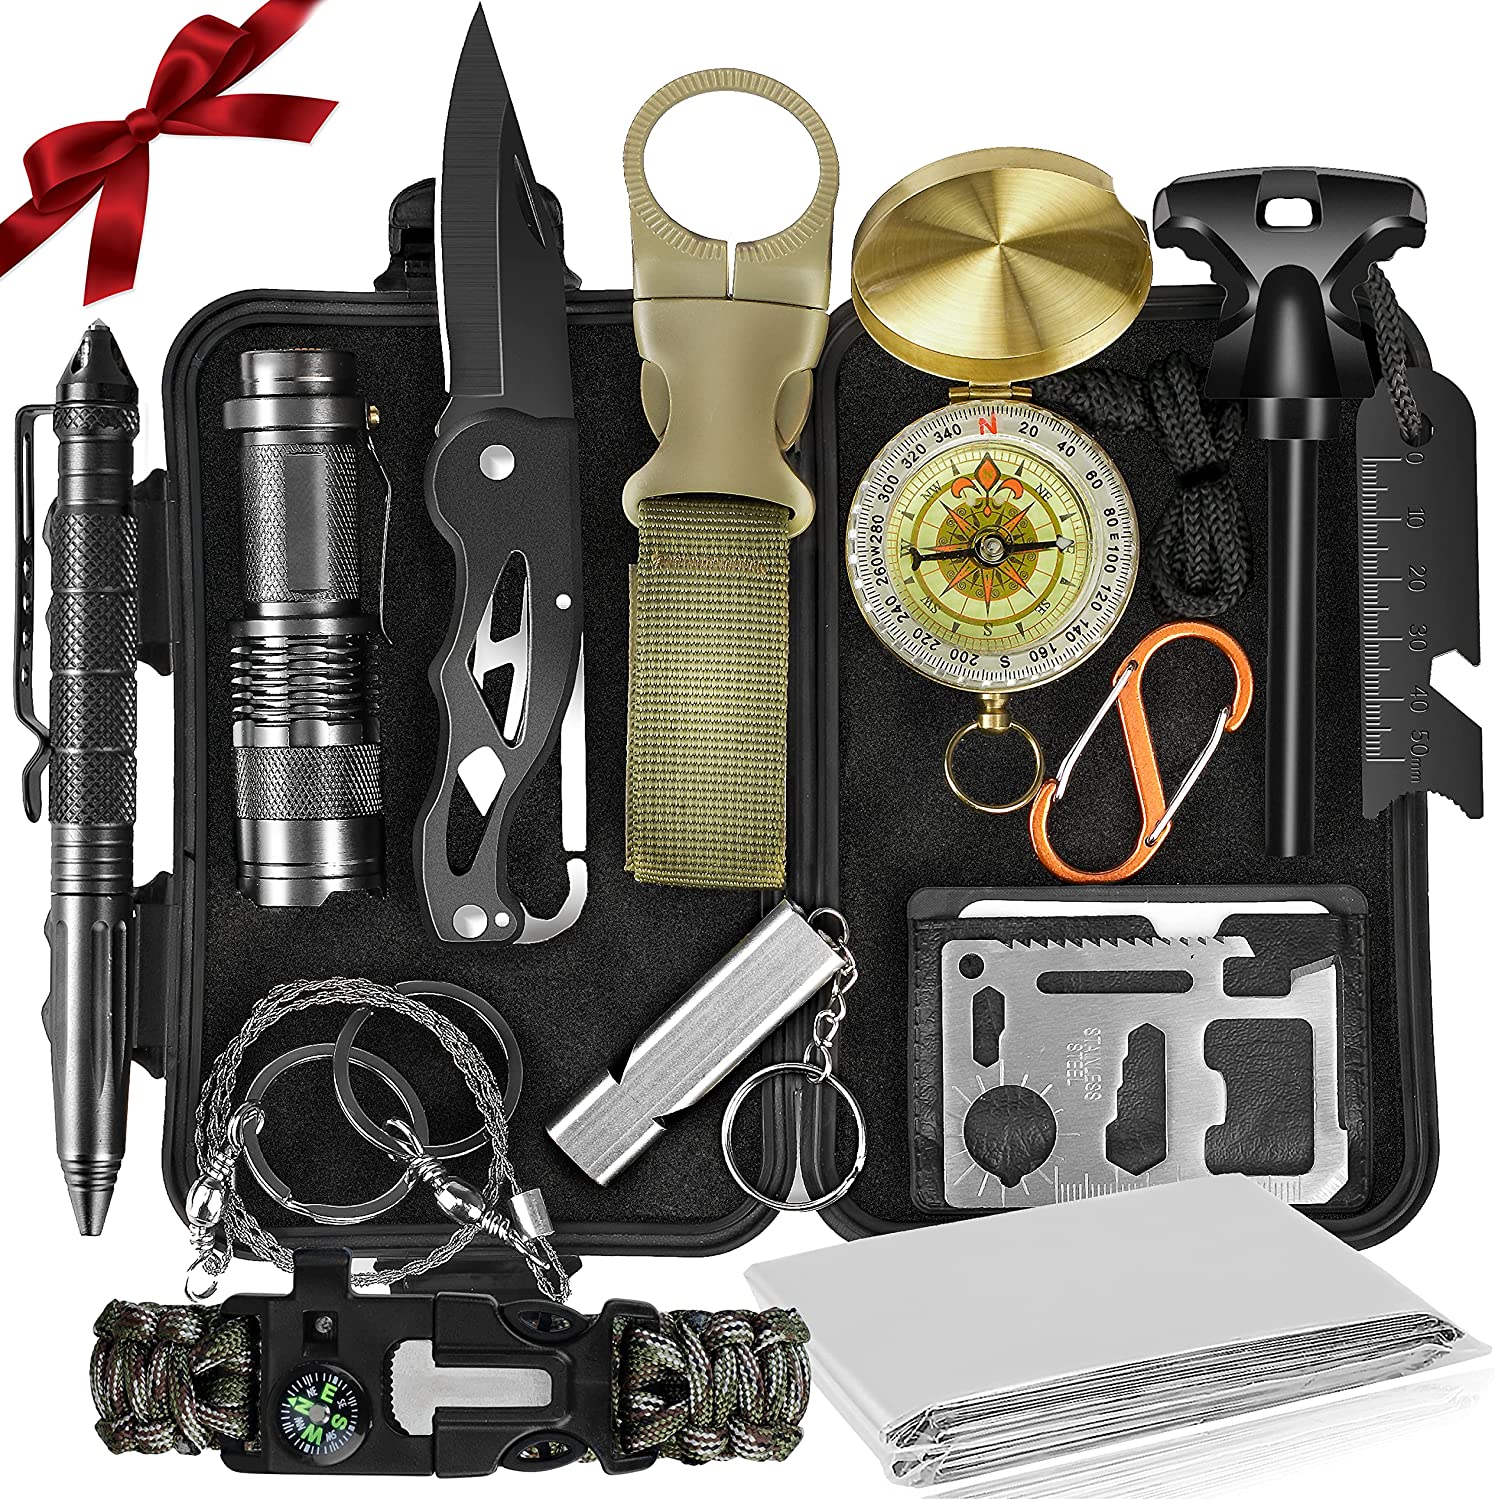 Your Choice Gifts Ideas for Men Dad Husband, Survival Kit 13 in 1, Emergency Survival Gear and Equipment Hunting Gear Hiking Gear for Men, Hunting Gifts for Men, Teen Boy